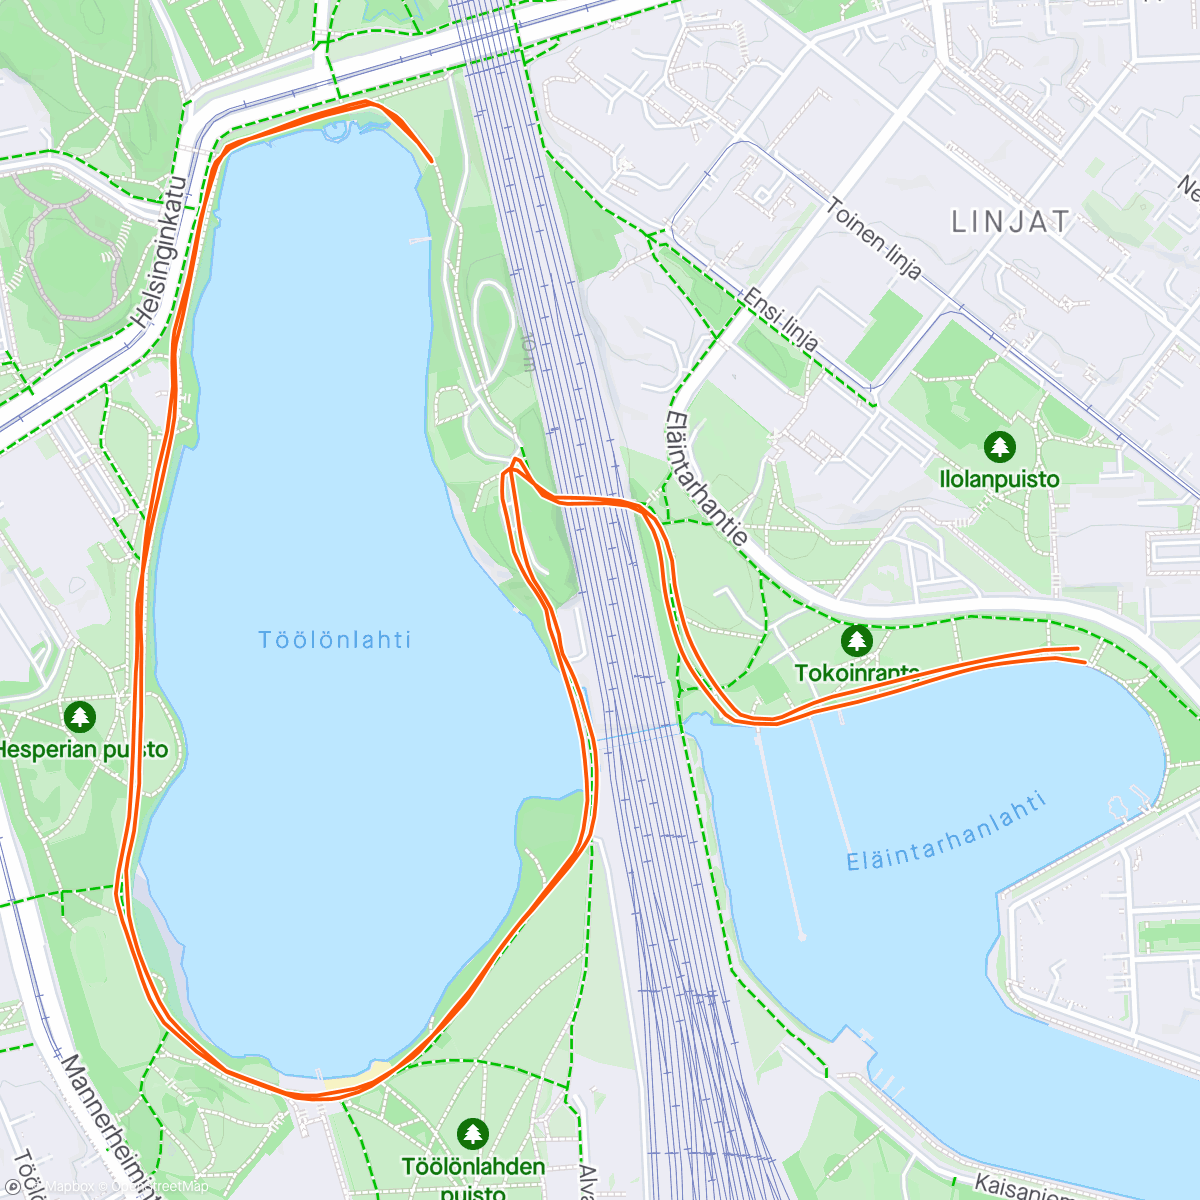 Map of the activity, legs didn’t feel overly that bad - just a little stiffness. Family holiday this week. Arrived in Helsinki, Finland yesterday - staying until tmr then fly to Oslo, Norway tmr until Sunday.